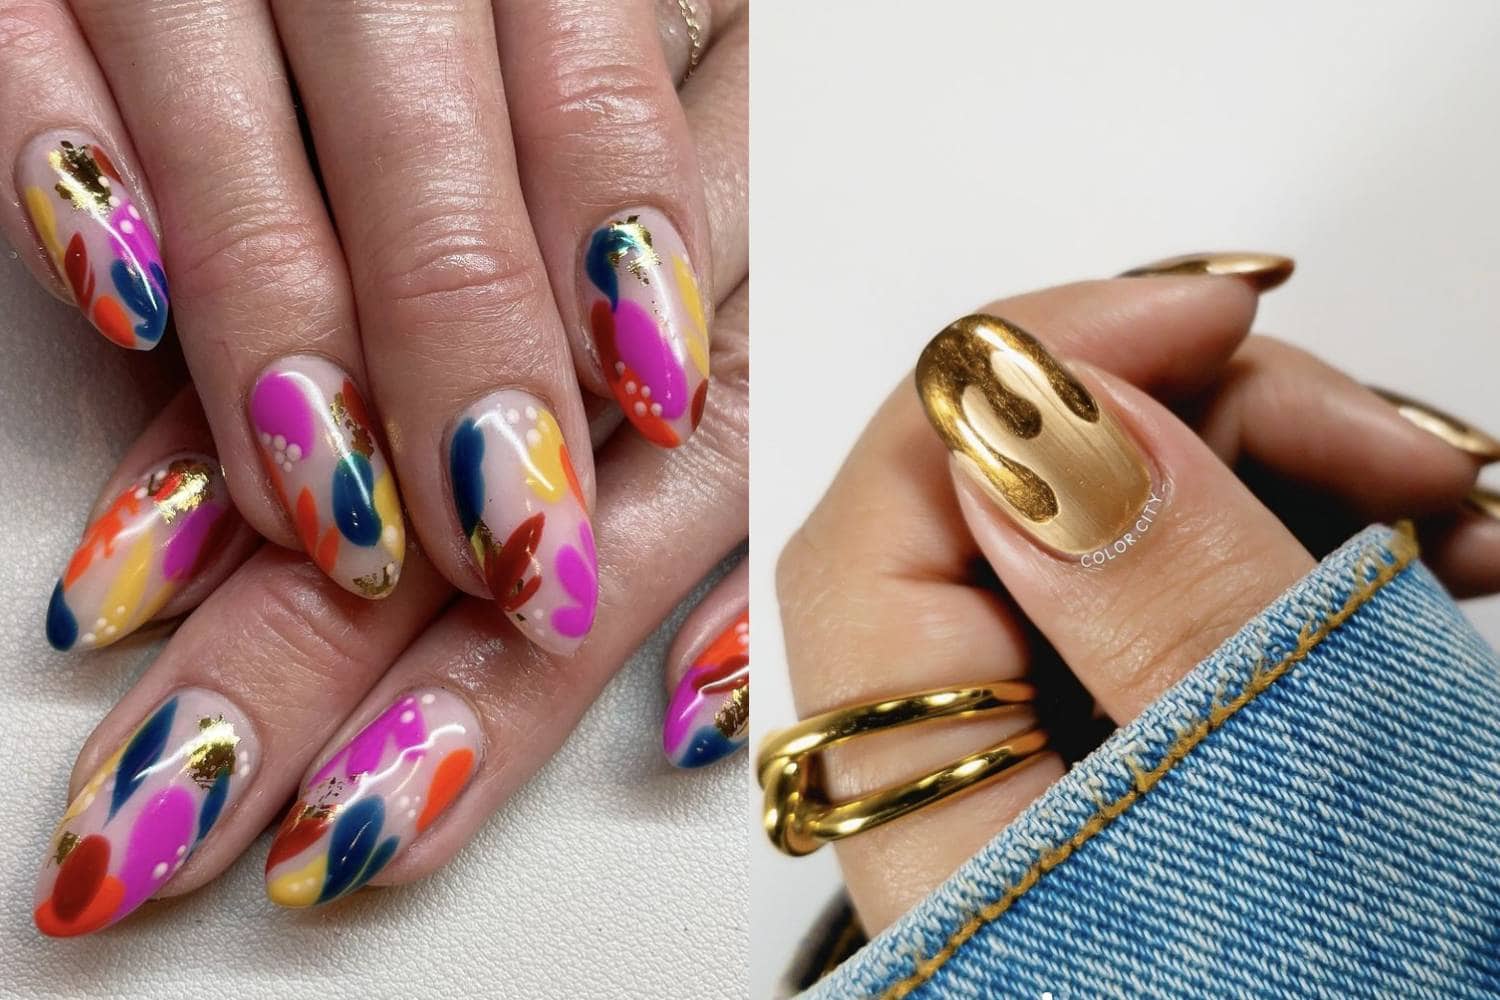 19 Gel Nail Ideas for Your Next Salon Manicure | Darcy